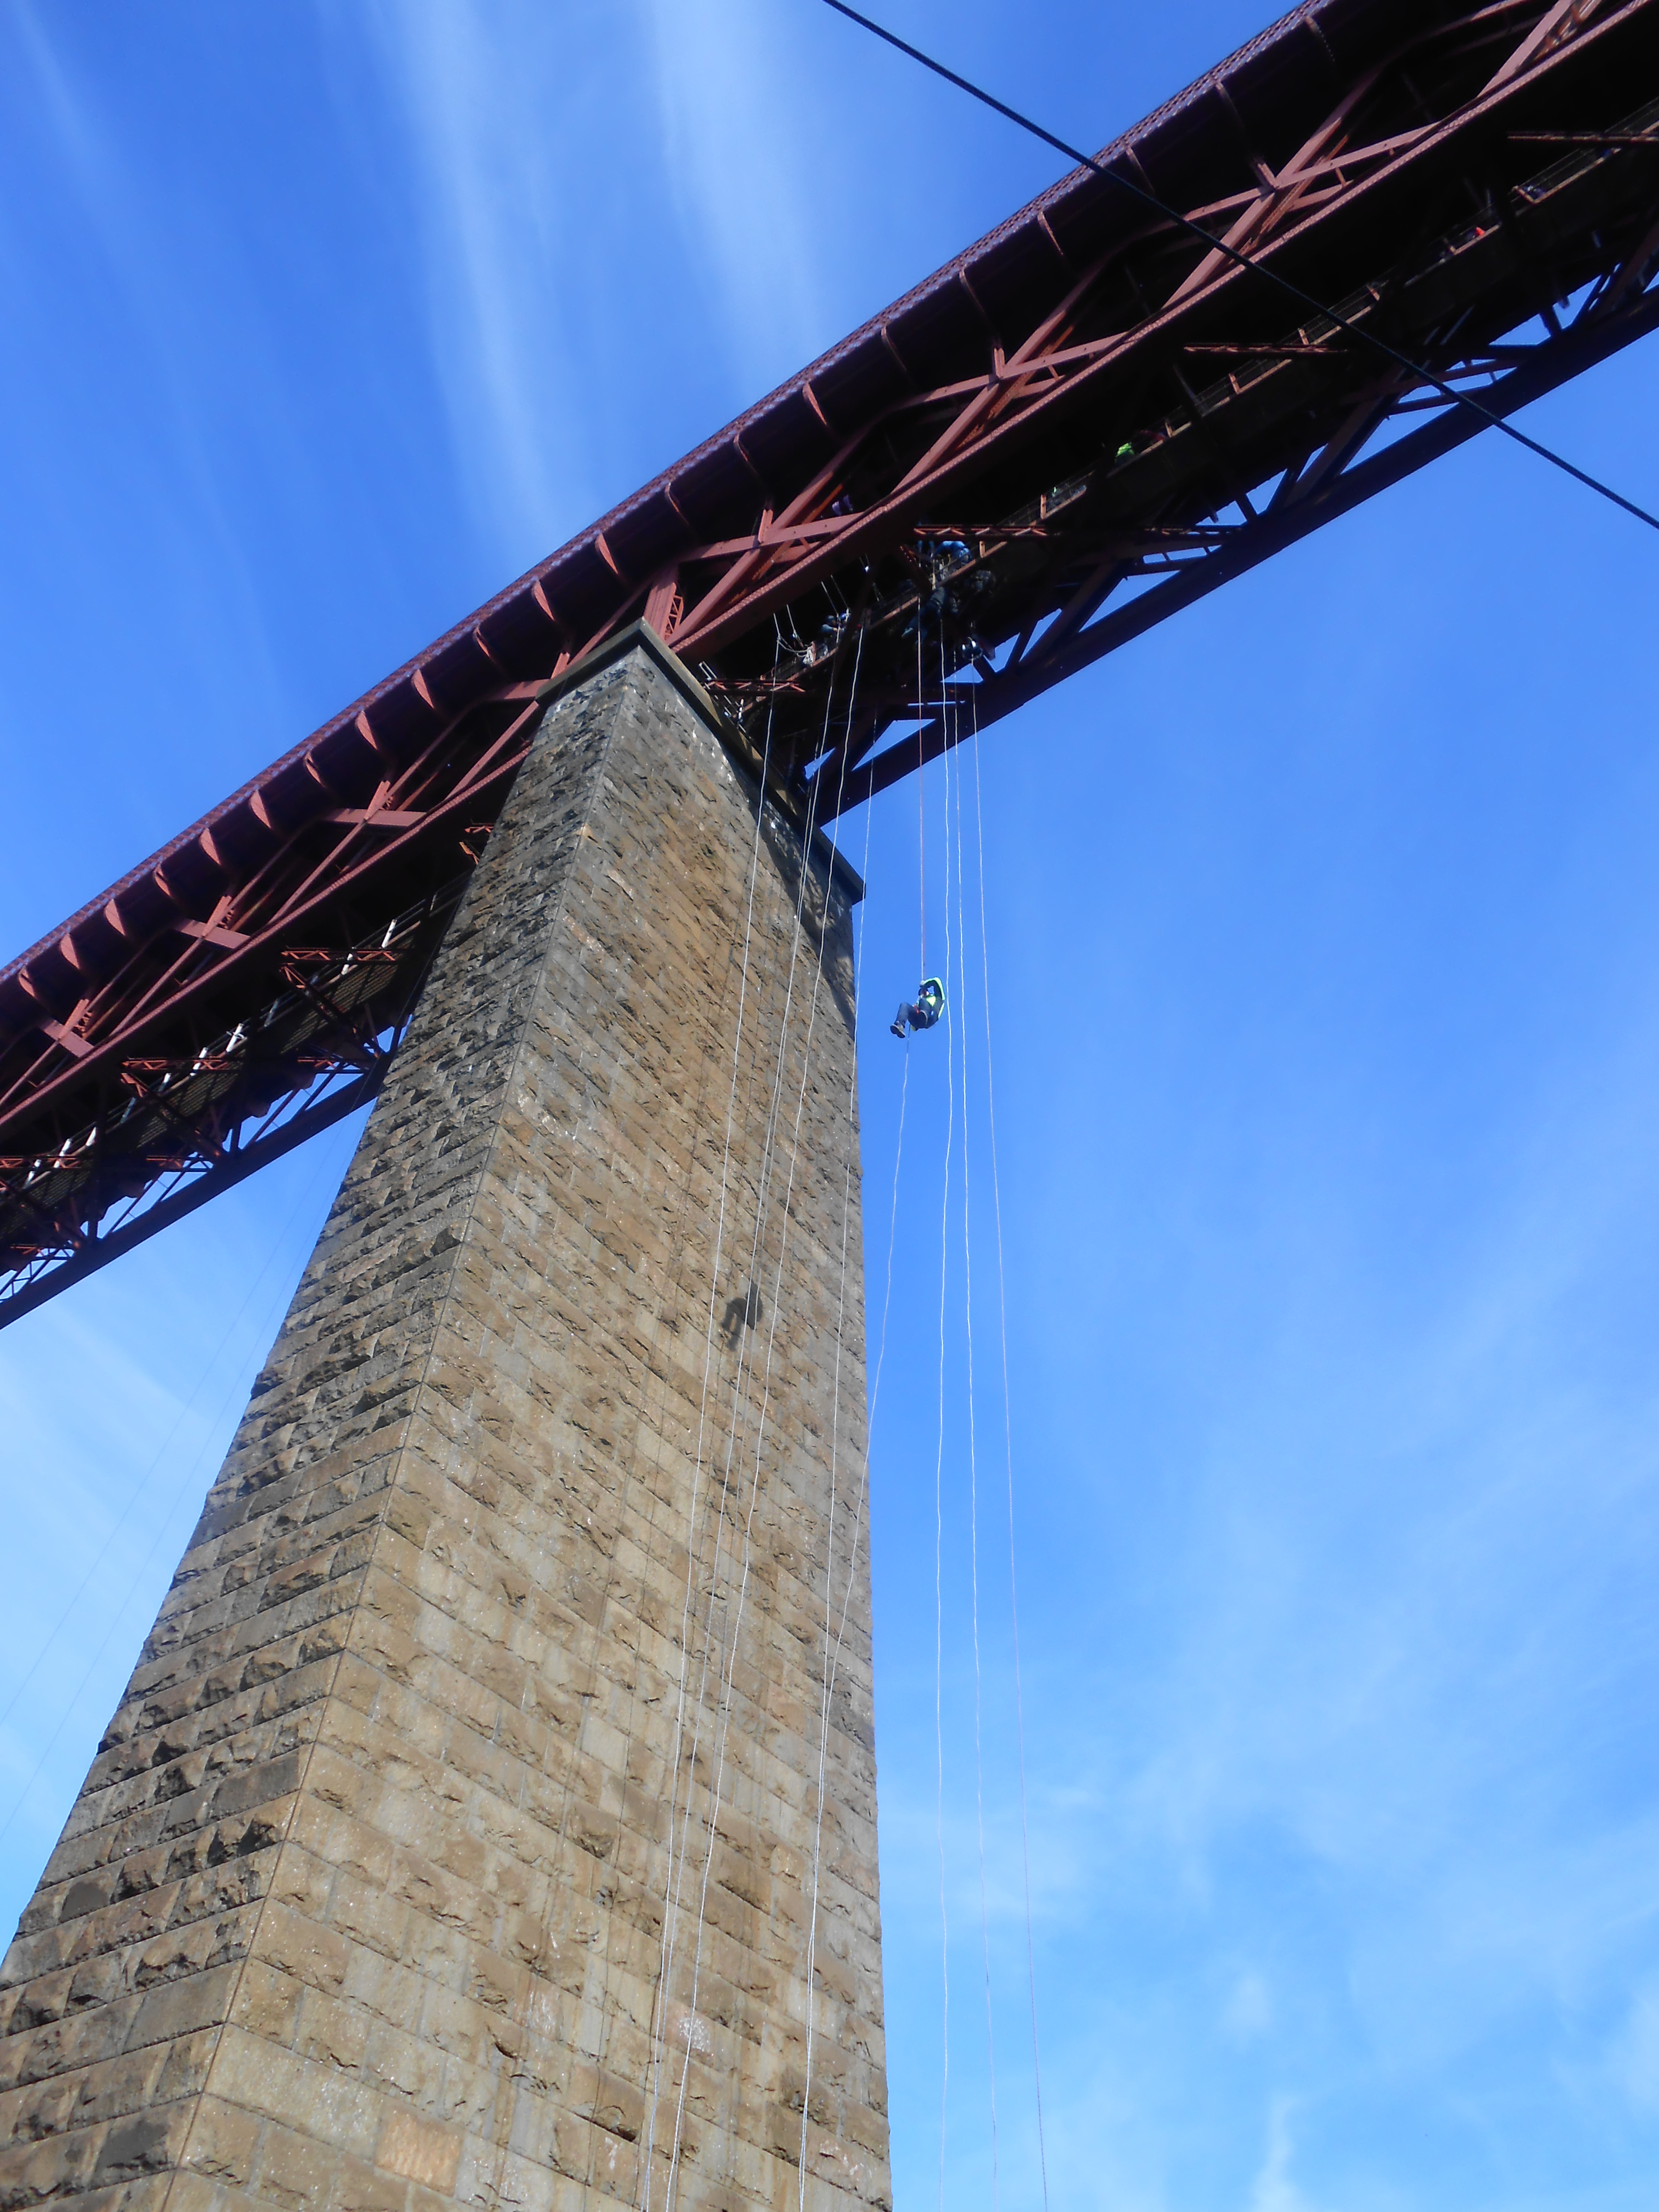 Completely Off Topic Forth Bridge Abseil 21 October 2012